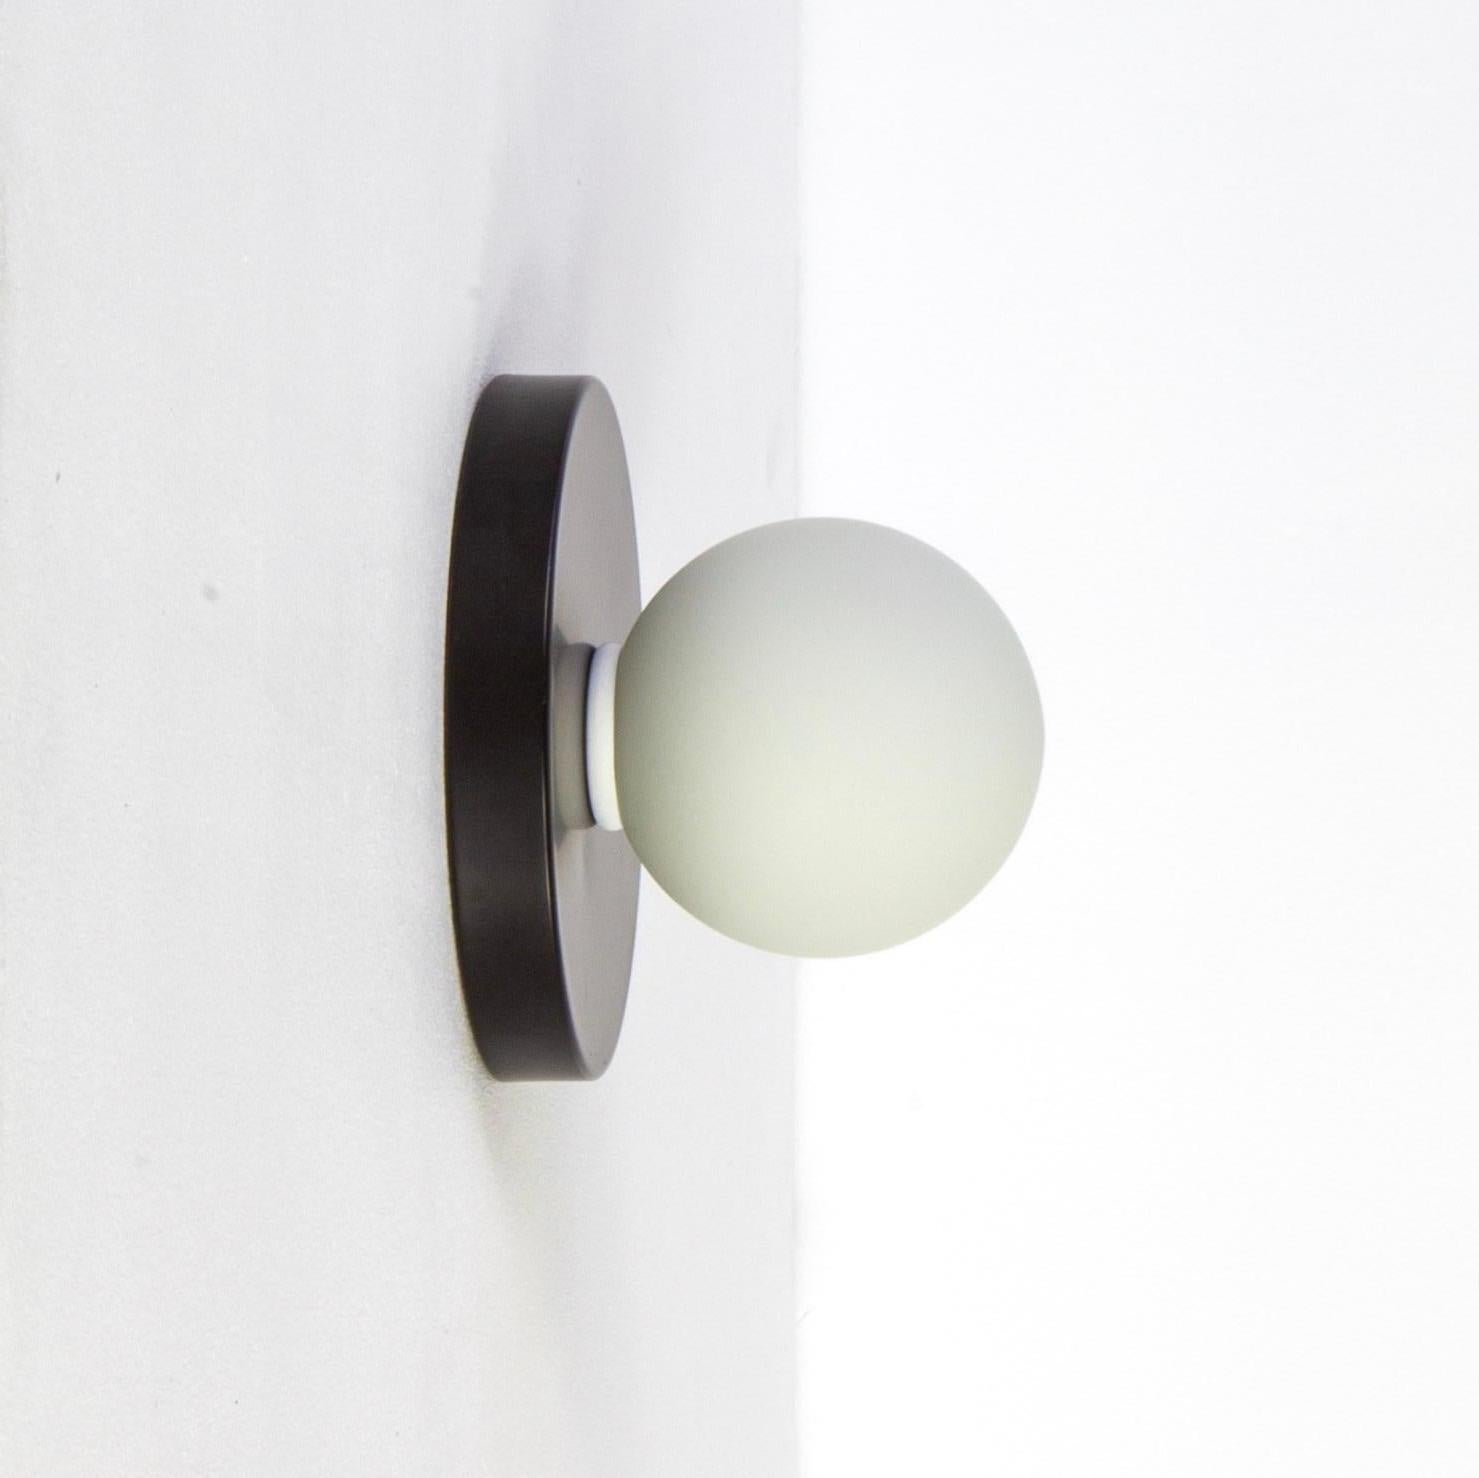 This listing is for 2x Globe Sconces in black designed and manufactured by Research.Lighting.

Materials: Steel & Glass
Finish: Powder-coated steel 
Electronics: 1x G9 Socket, 1x 4.5 Watt LED Bulb (included), 450 Lumens
ADA Compliant. UL Listed.